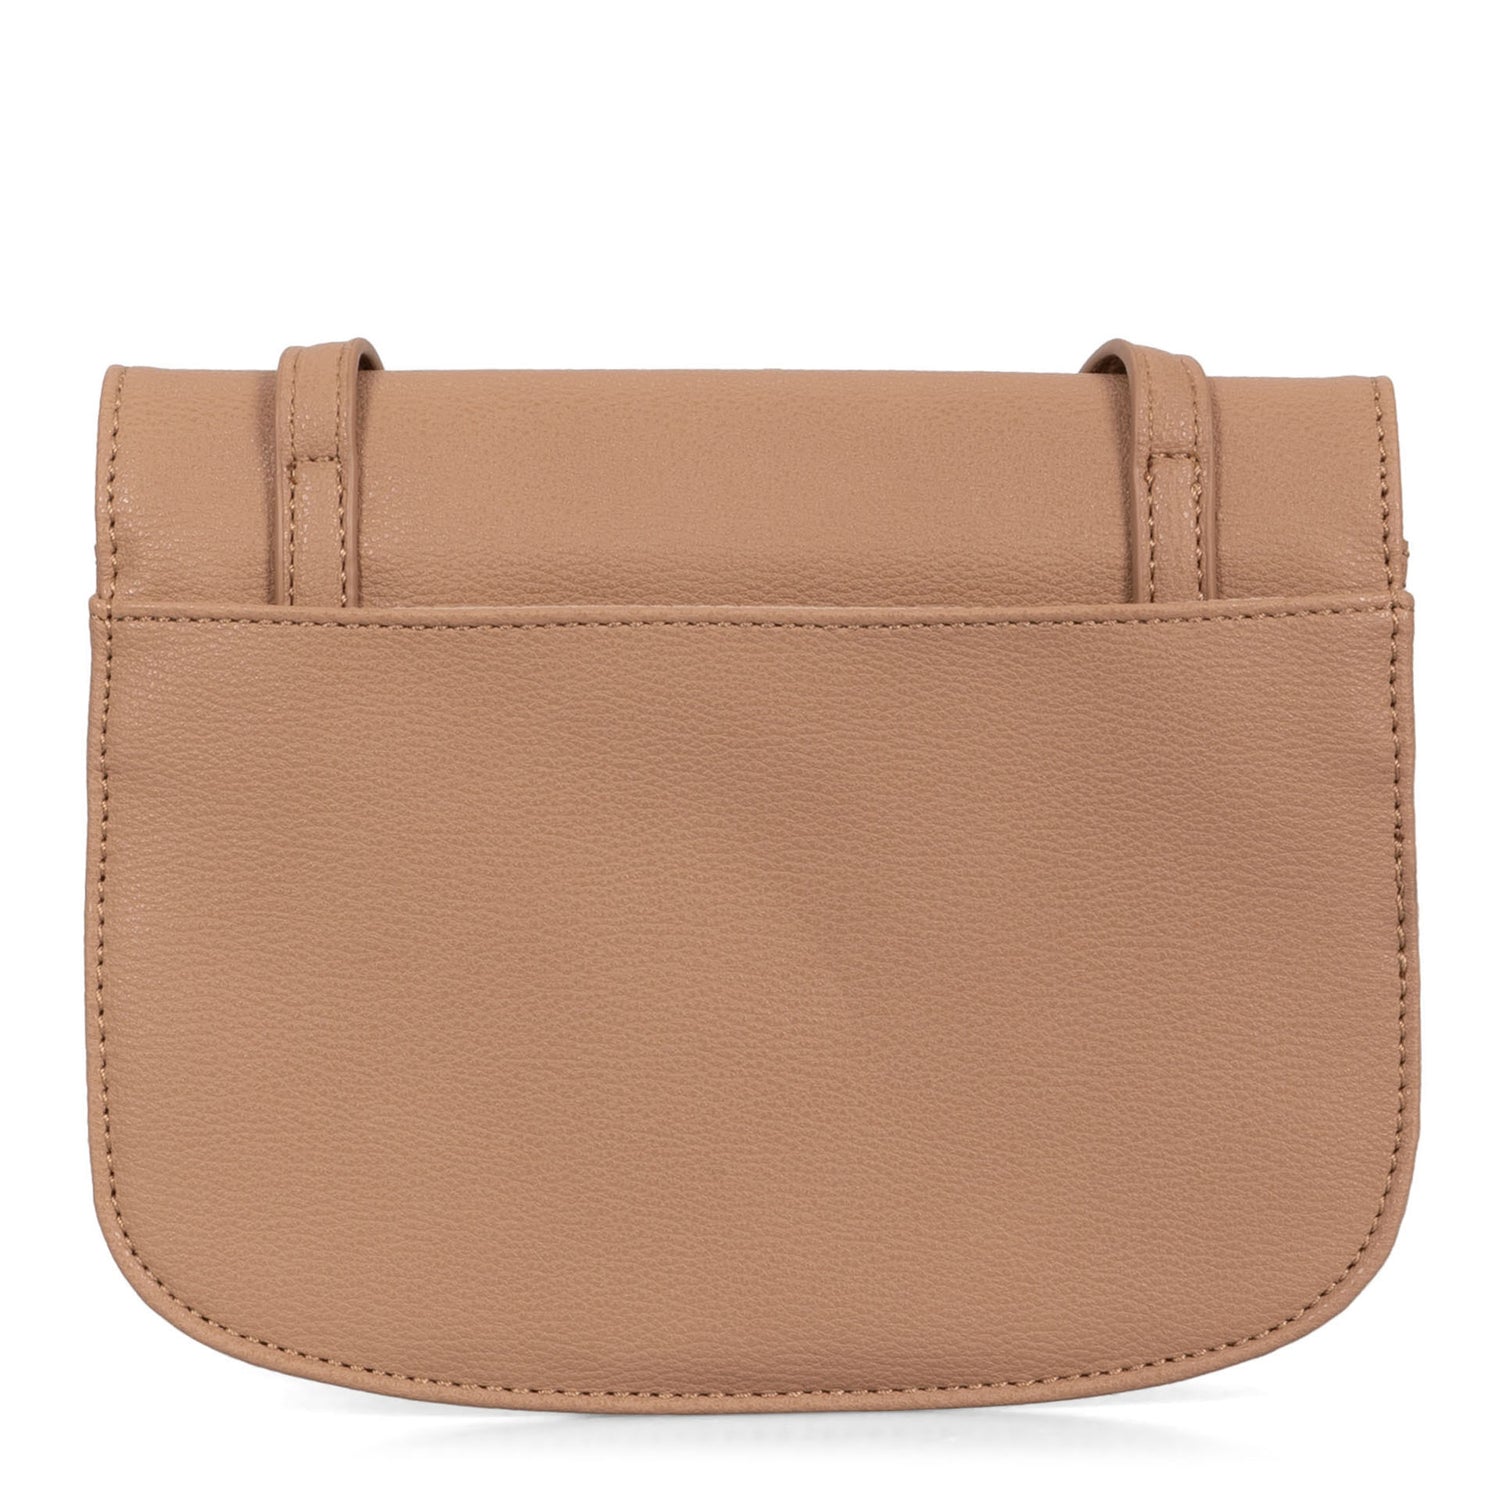 Backside of a beige crossbody bag for women called Organizers on a white background, showcasing its interior and smooth texture - bentley